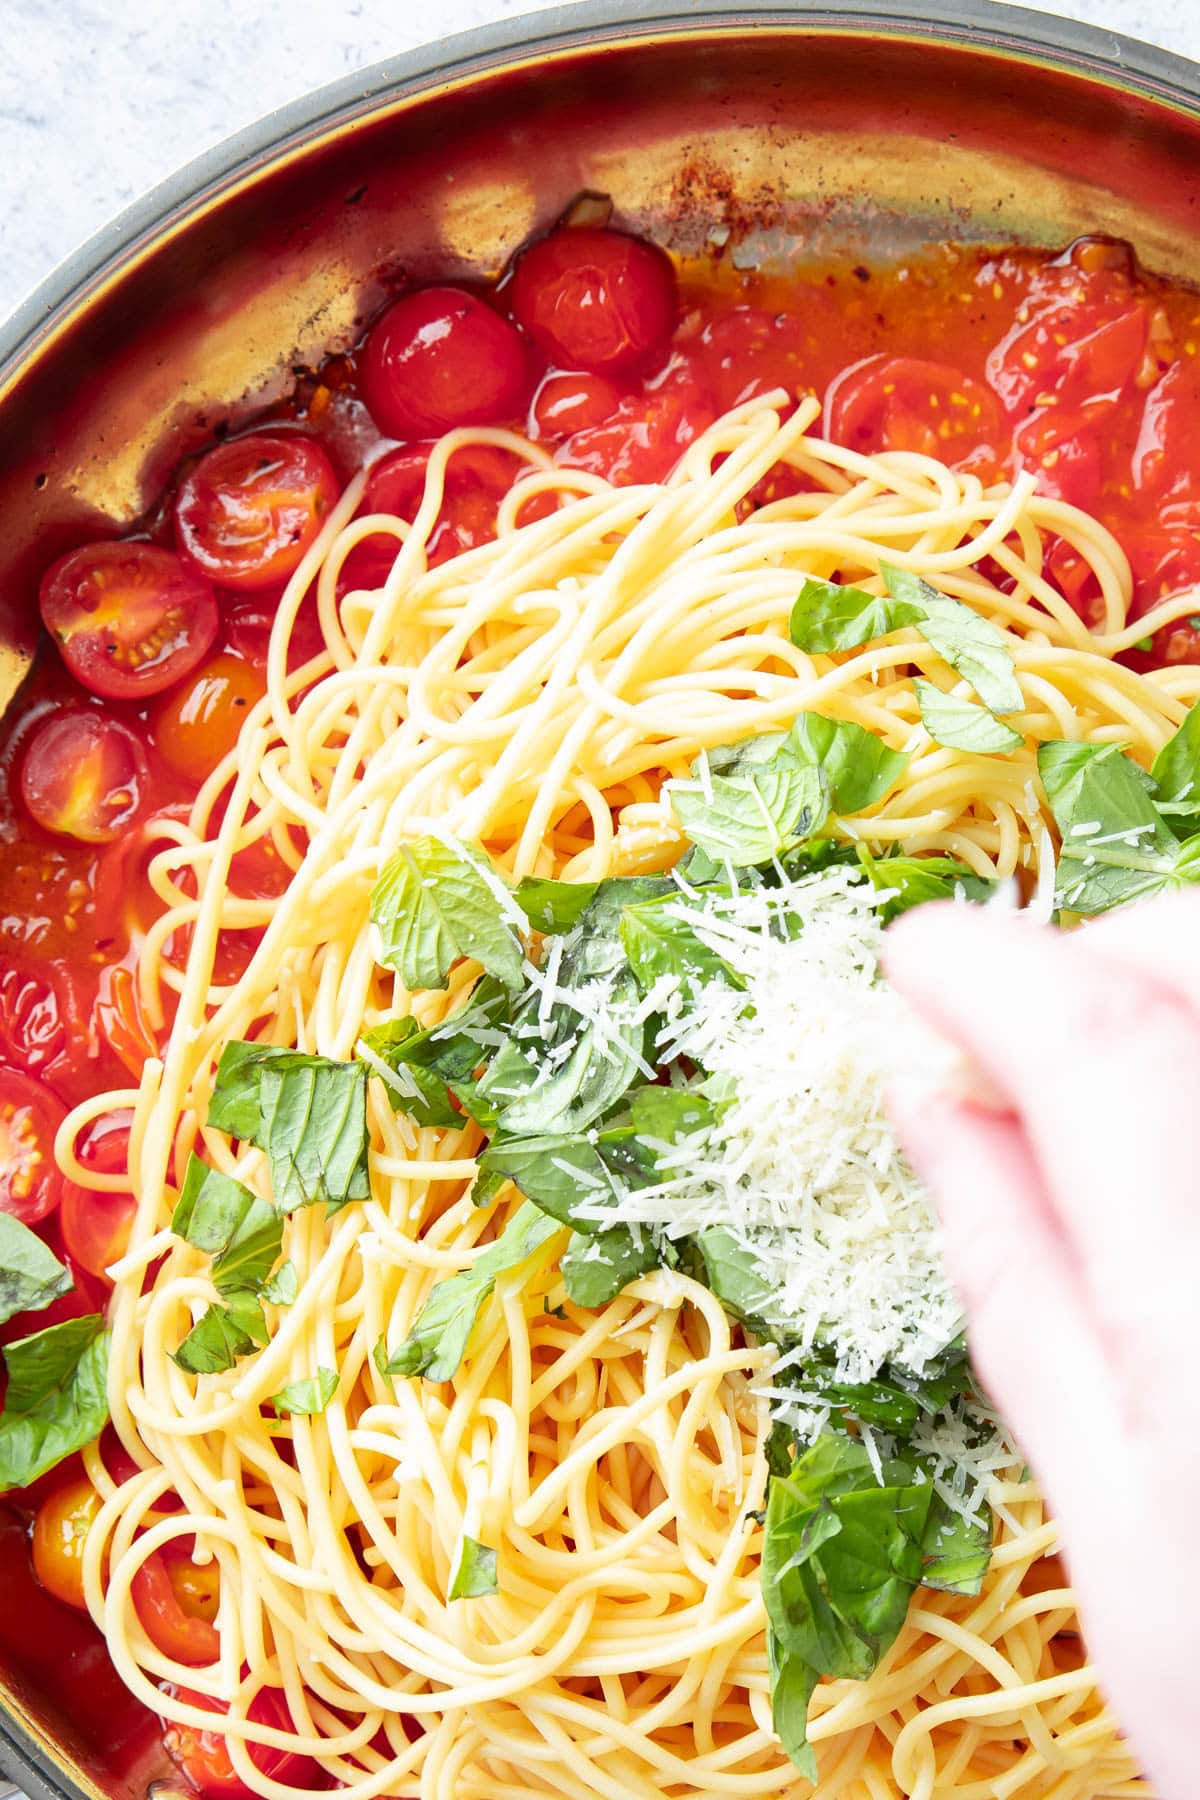 A tomato-filled vegetable side dish topped with parmesan and fresh basil leaves